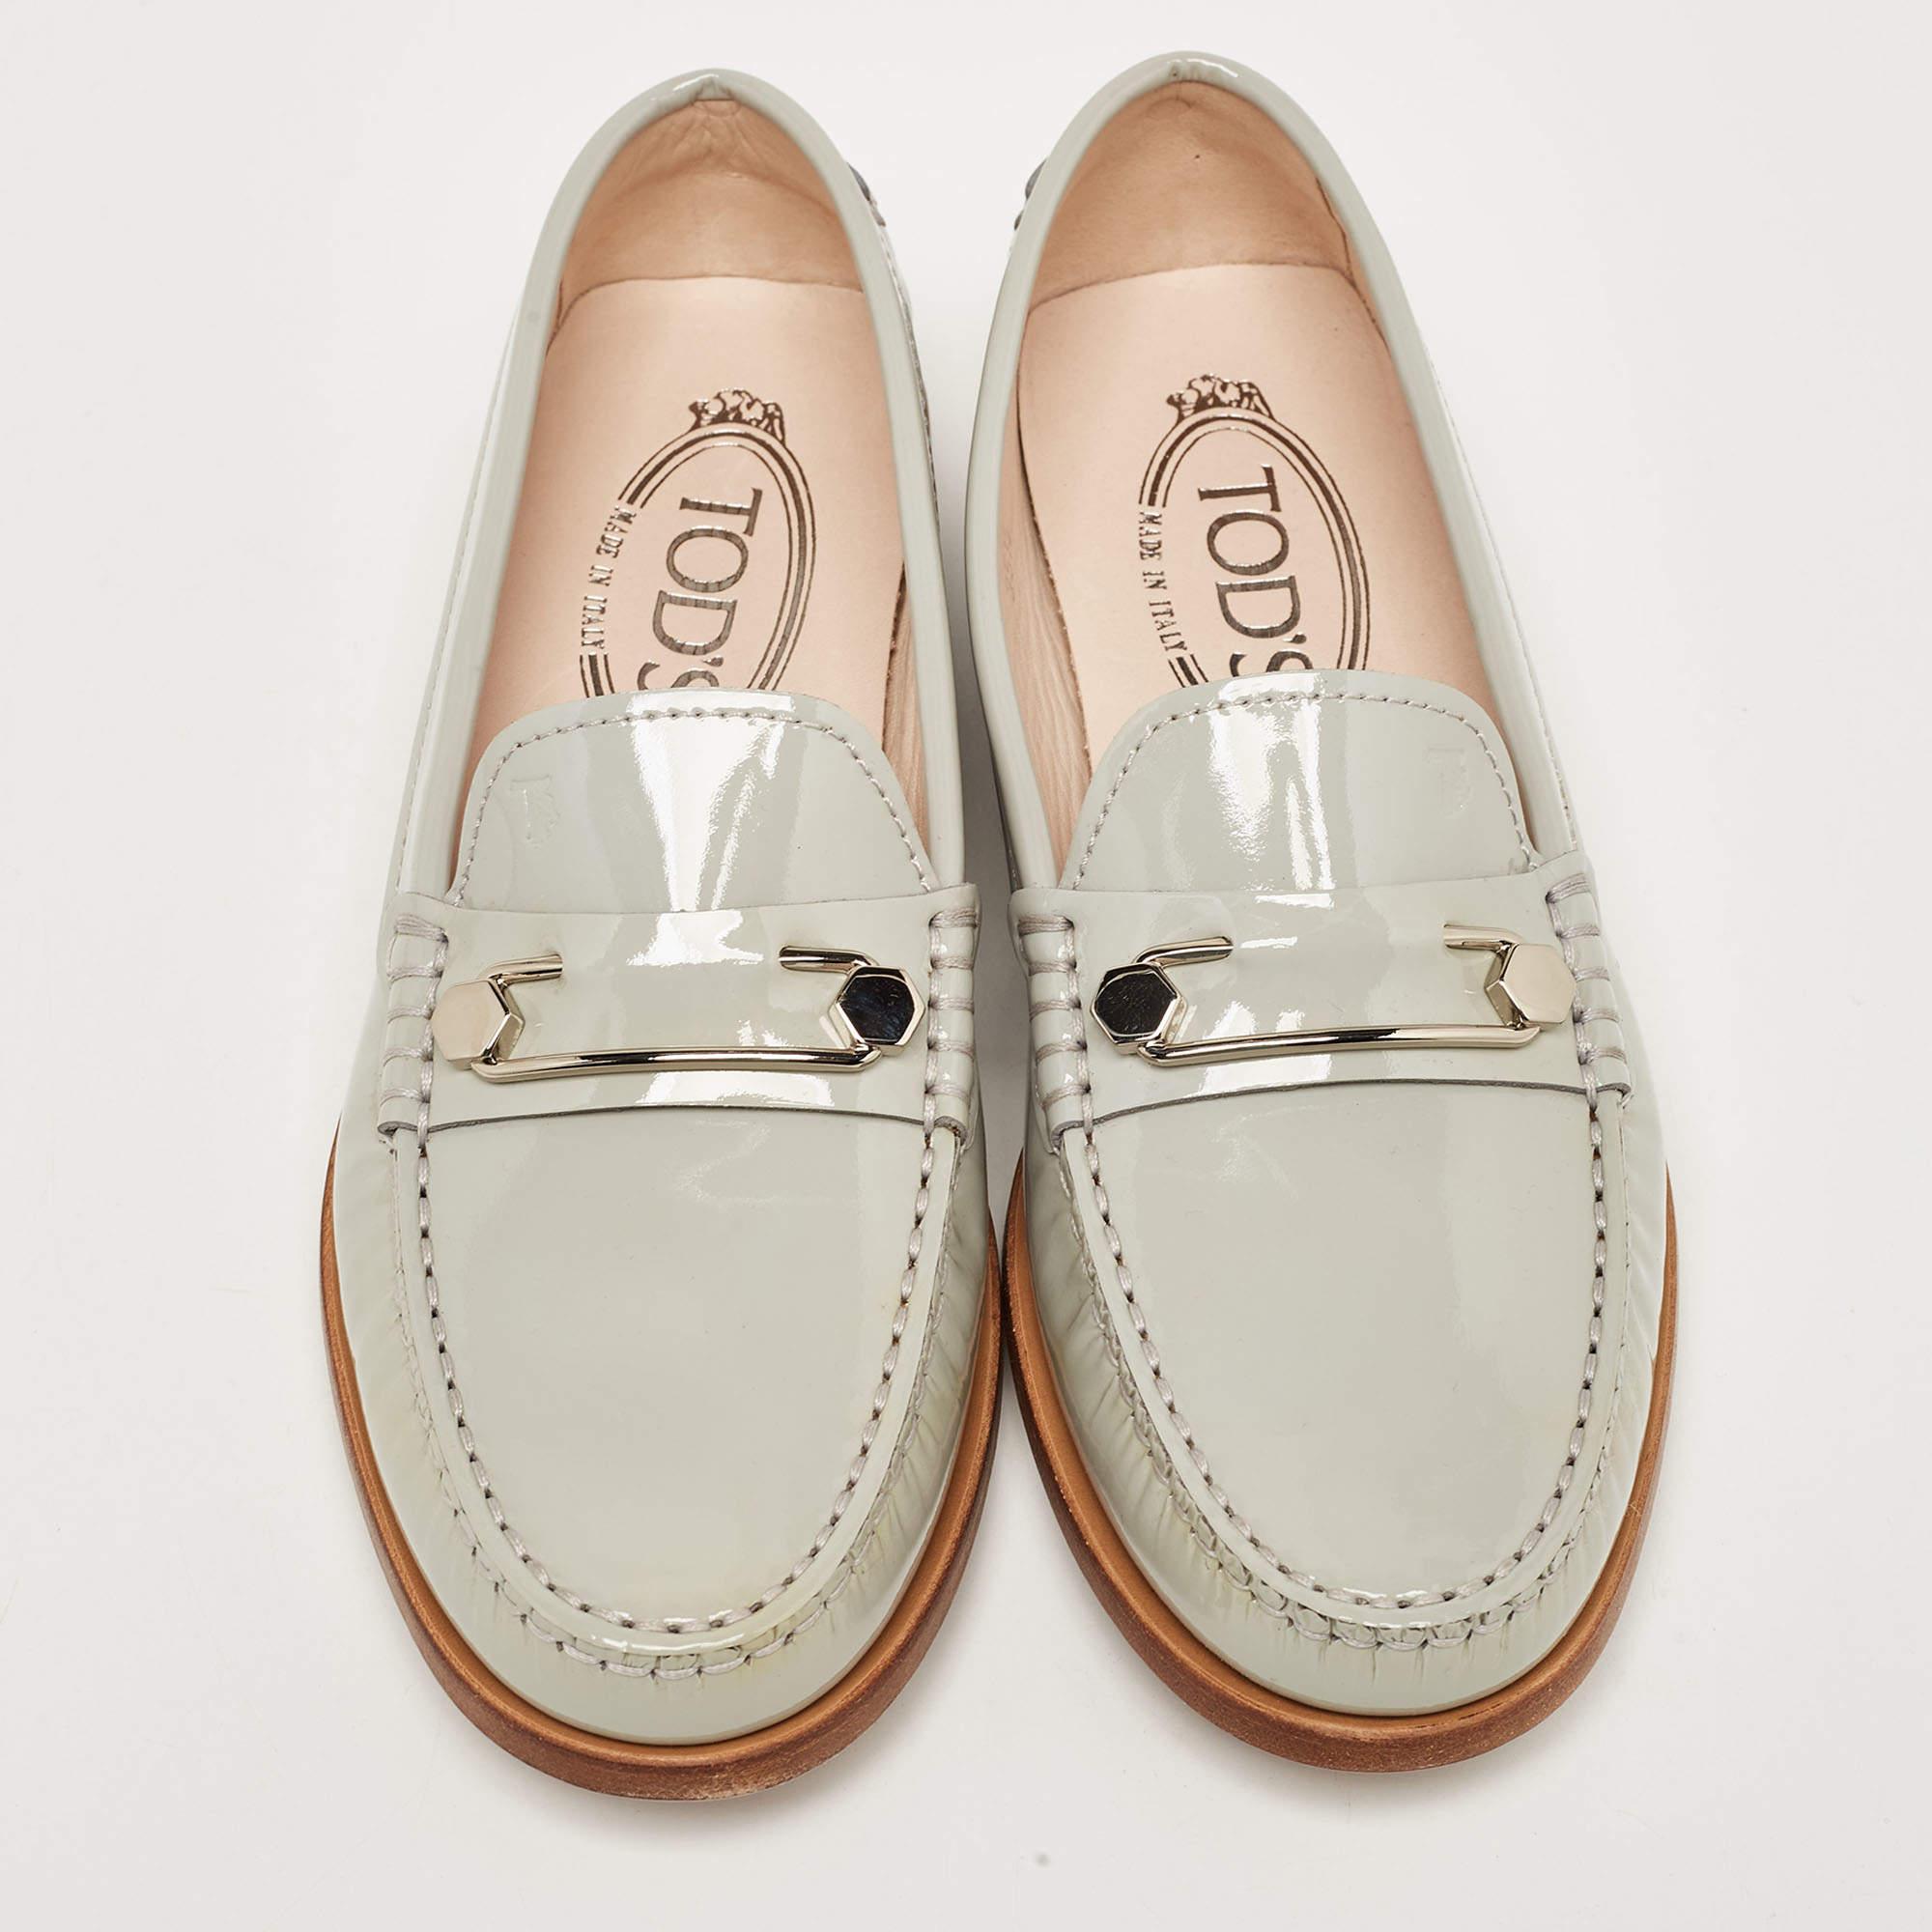 Practical, fashionable, and durable—these designer loafers are carefully built to be fine companions to your everyday style. They come made using the best materials to be a prized buy.

Includes
Original Dustbag, Original Box, Info Booklet